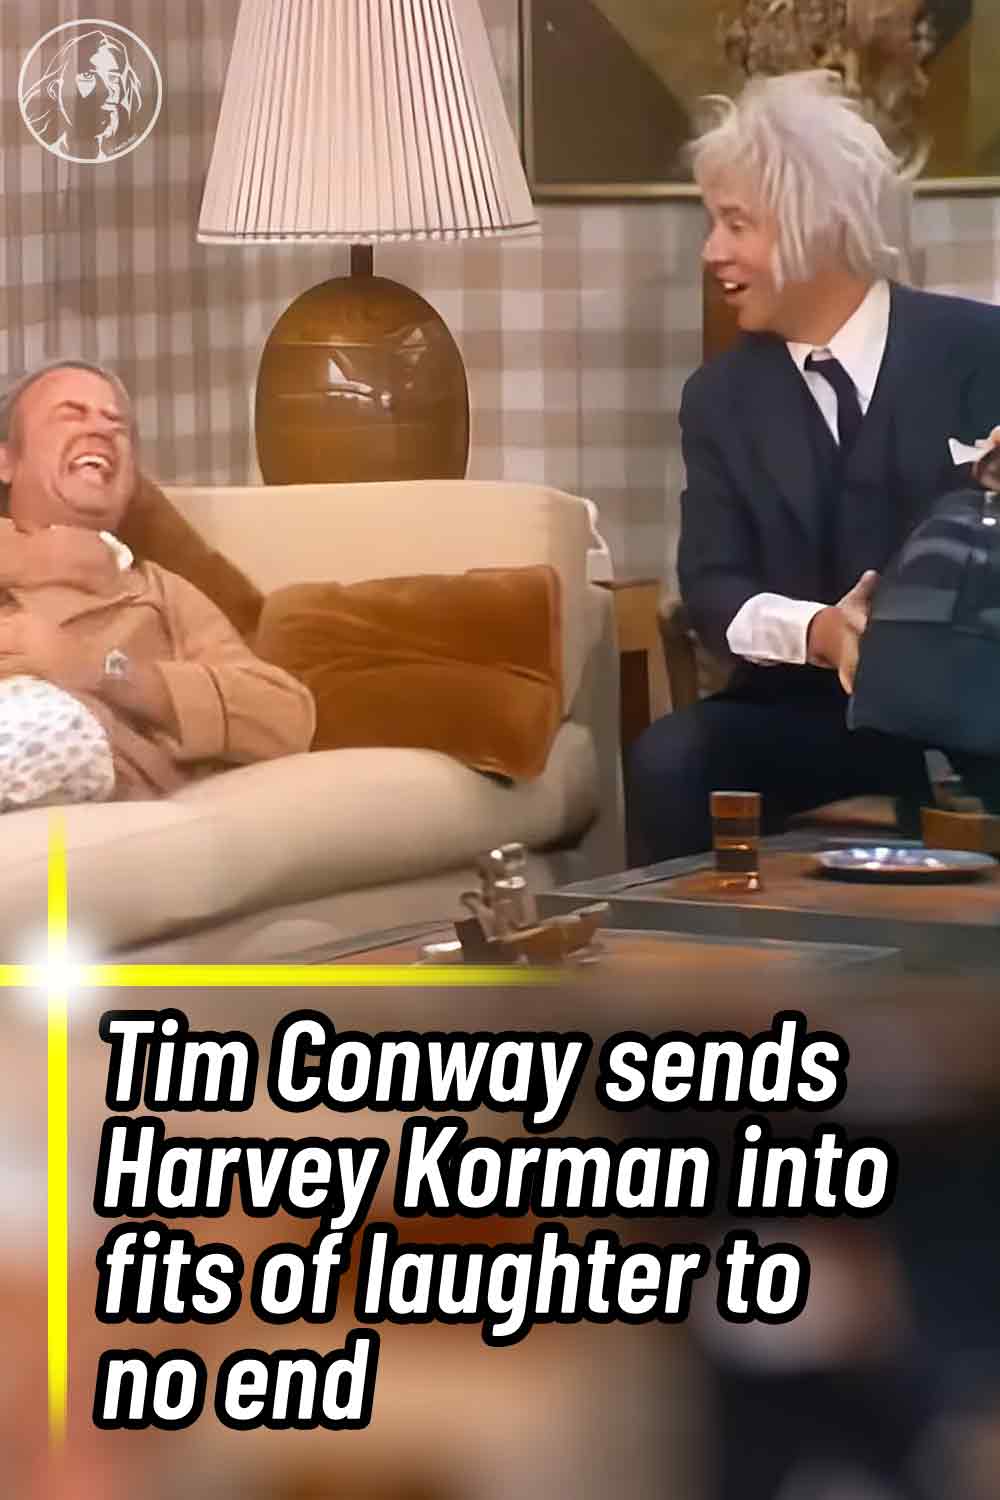 Tim Conway sends Harvey Korman into fits of laughter to no end